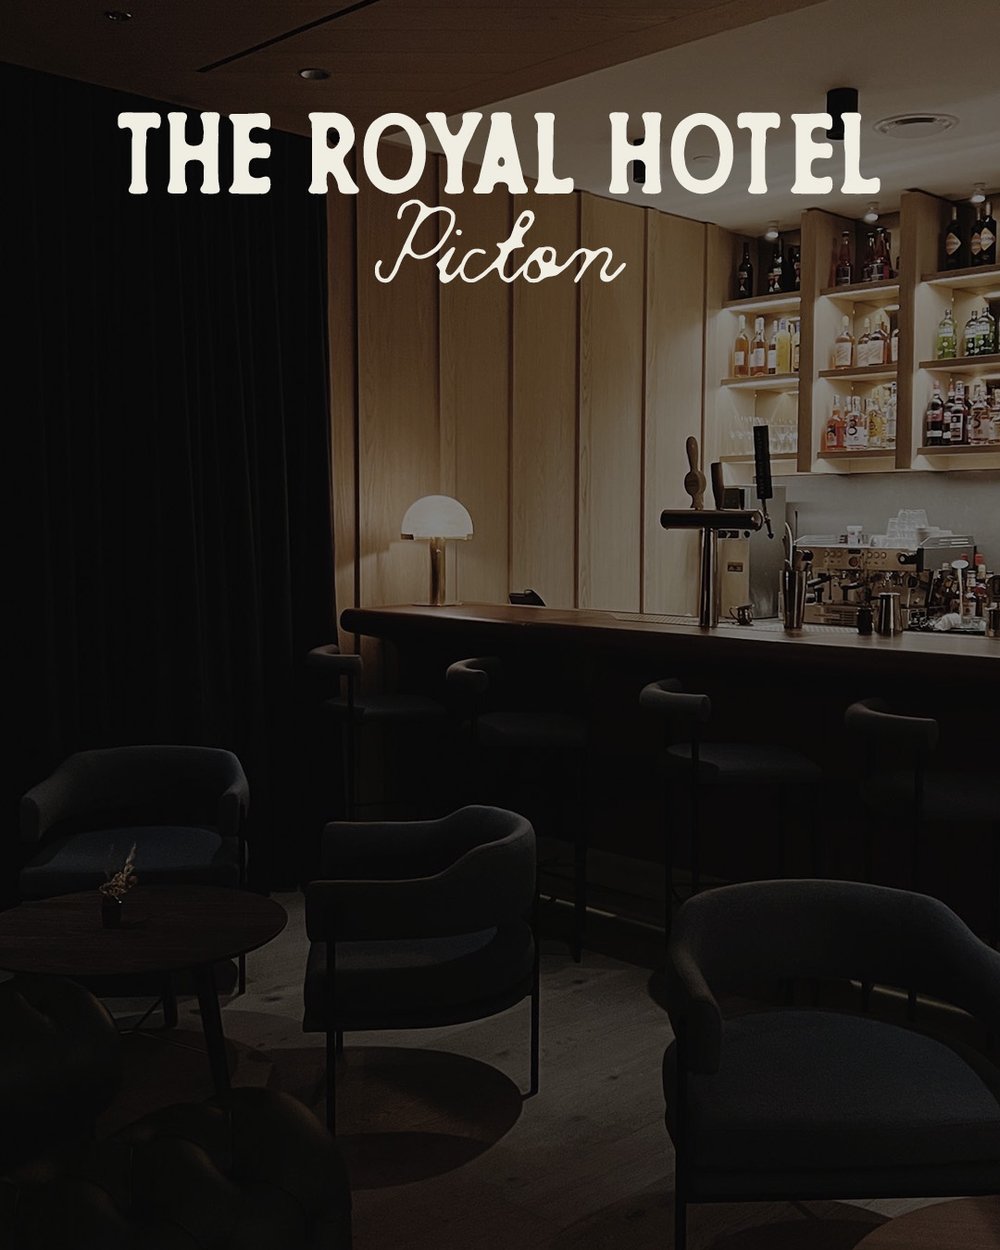 The Royal Hotel, Picton